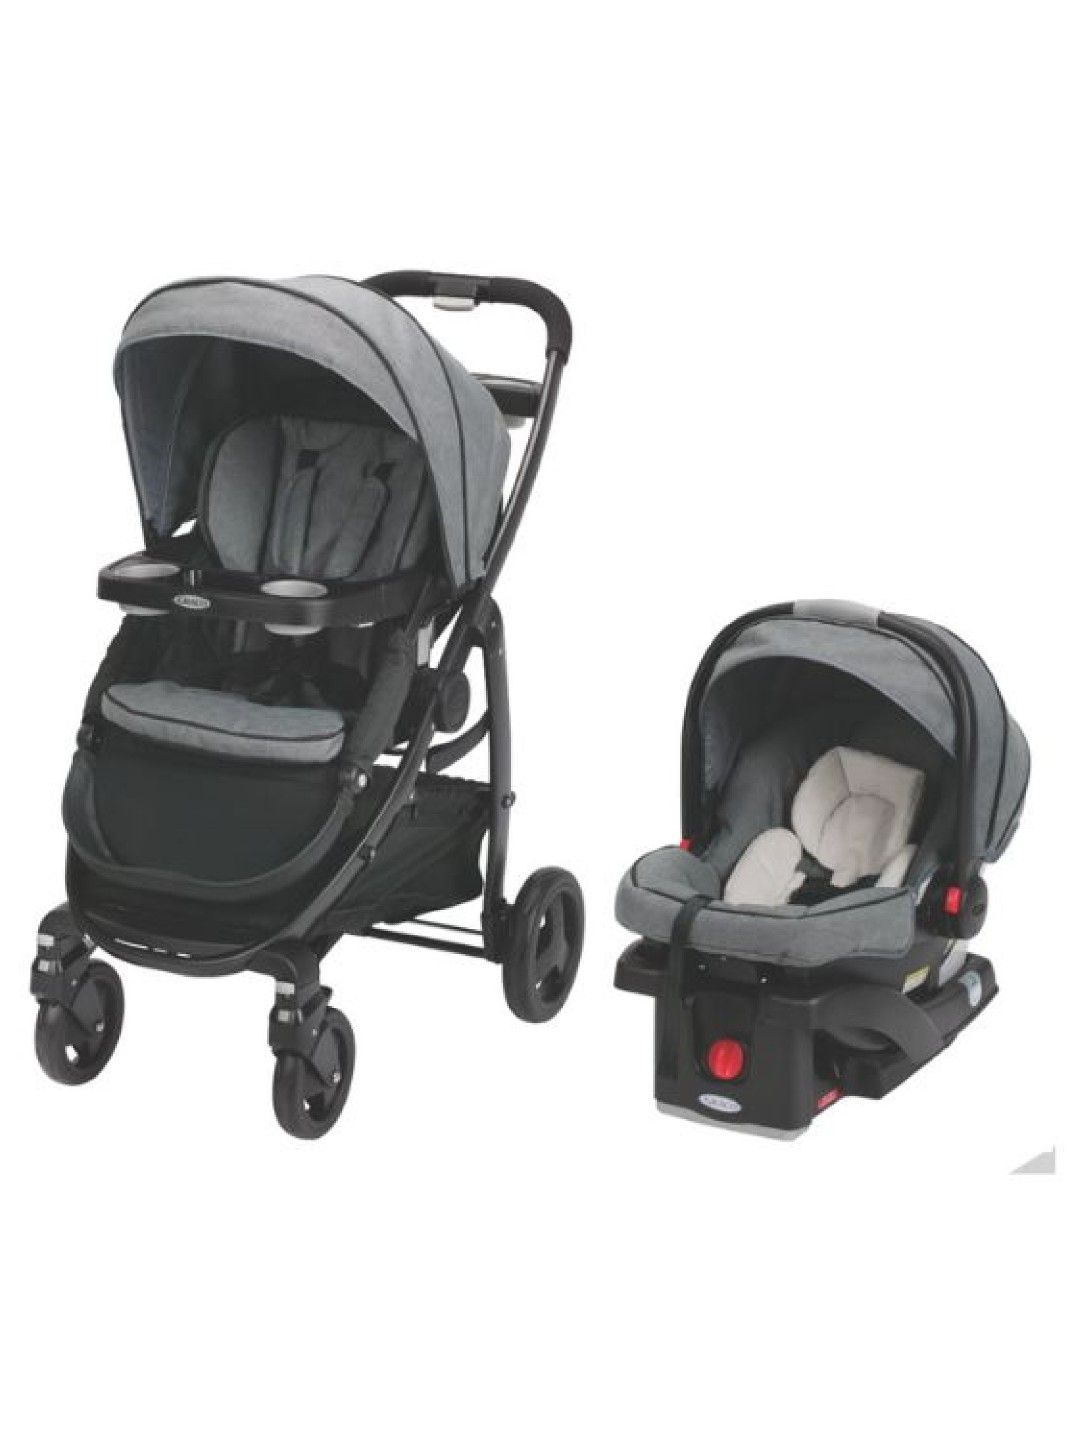 Graco Mode Click Connect Travel System Stroller with Car Seat - Downton